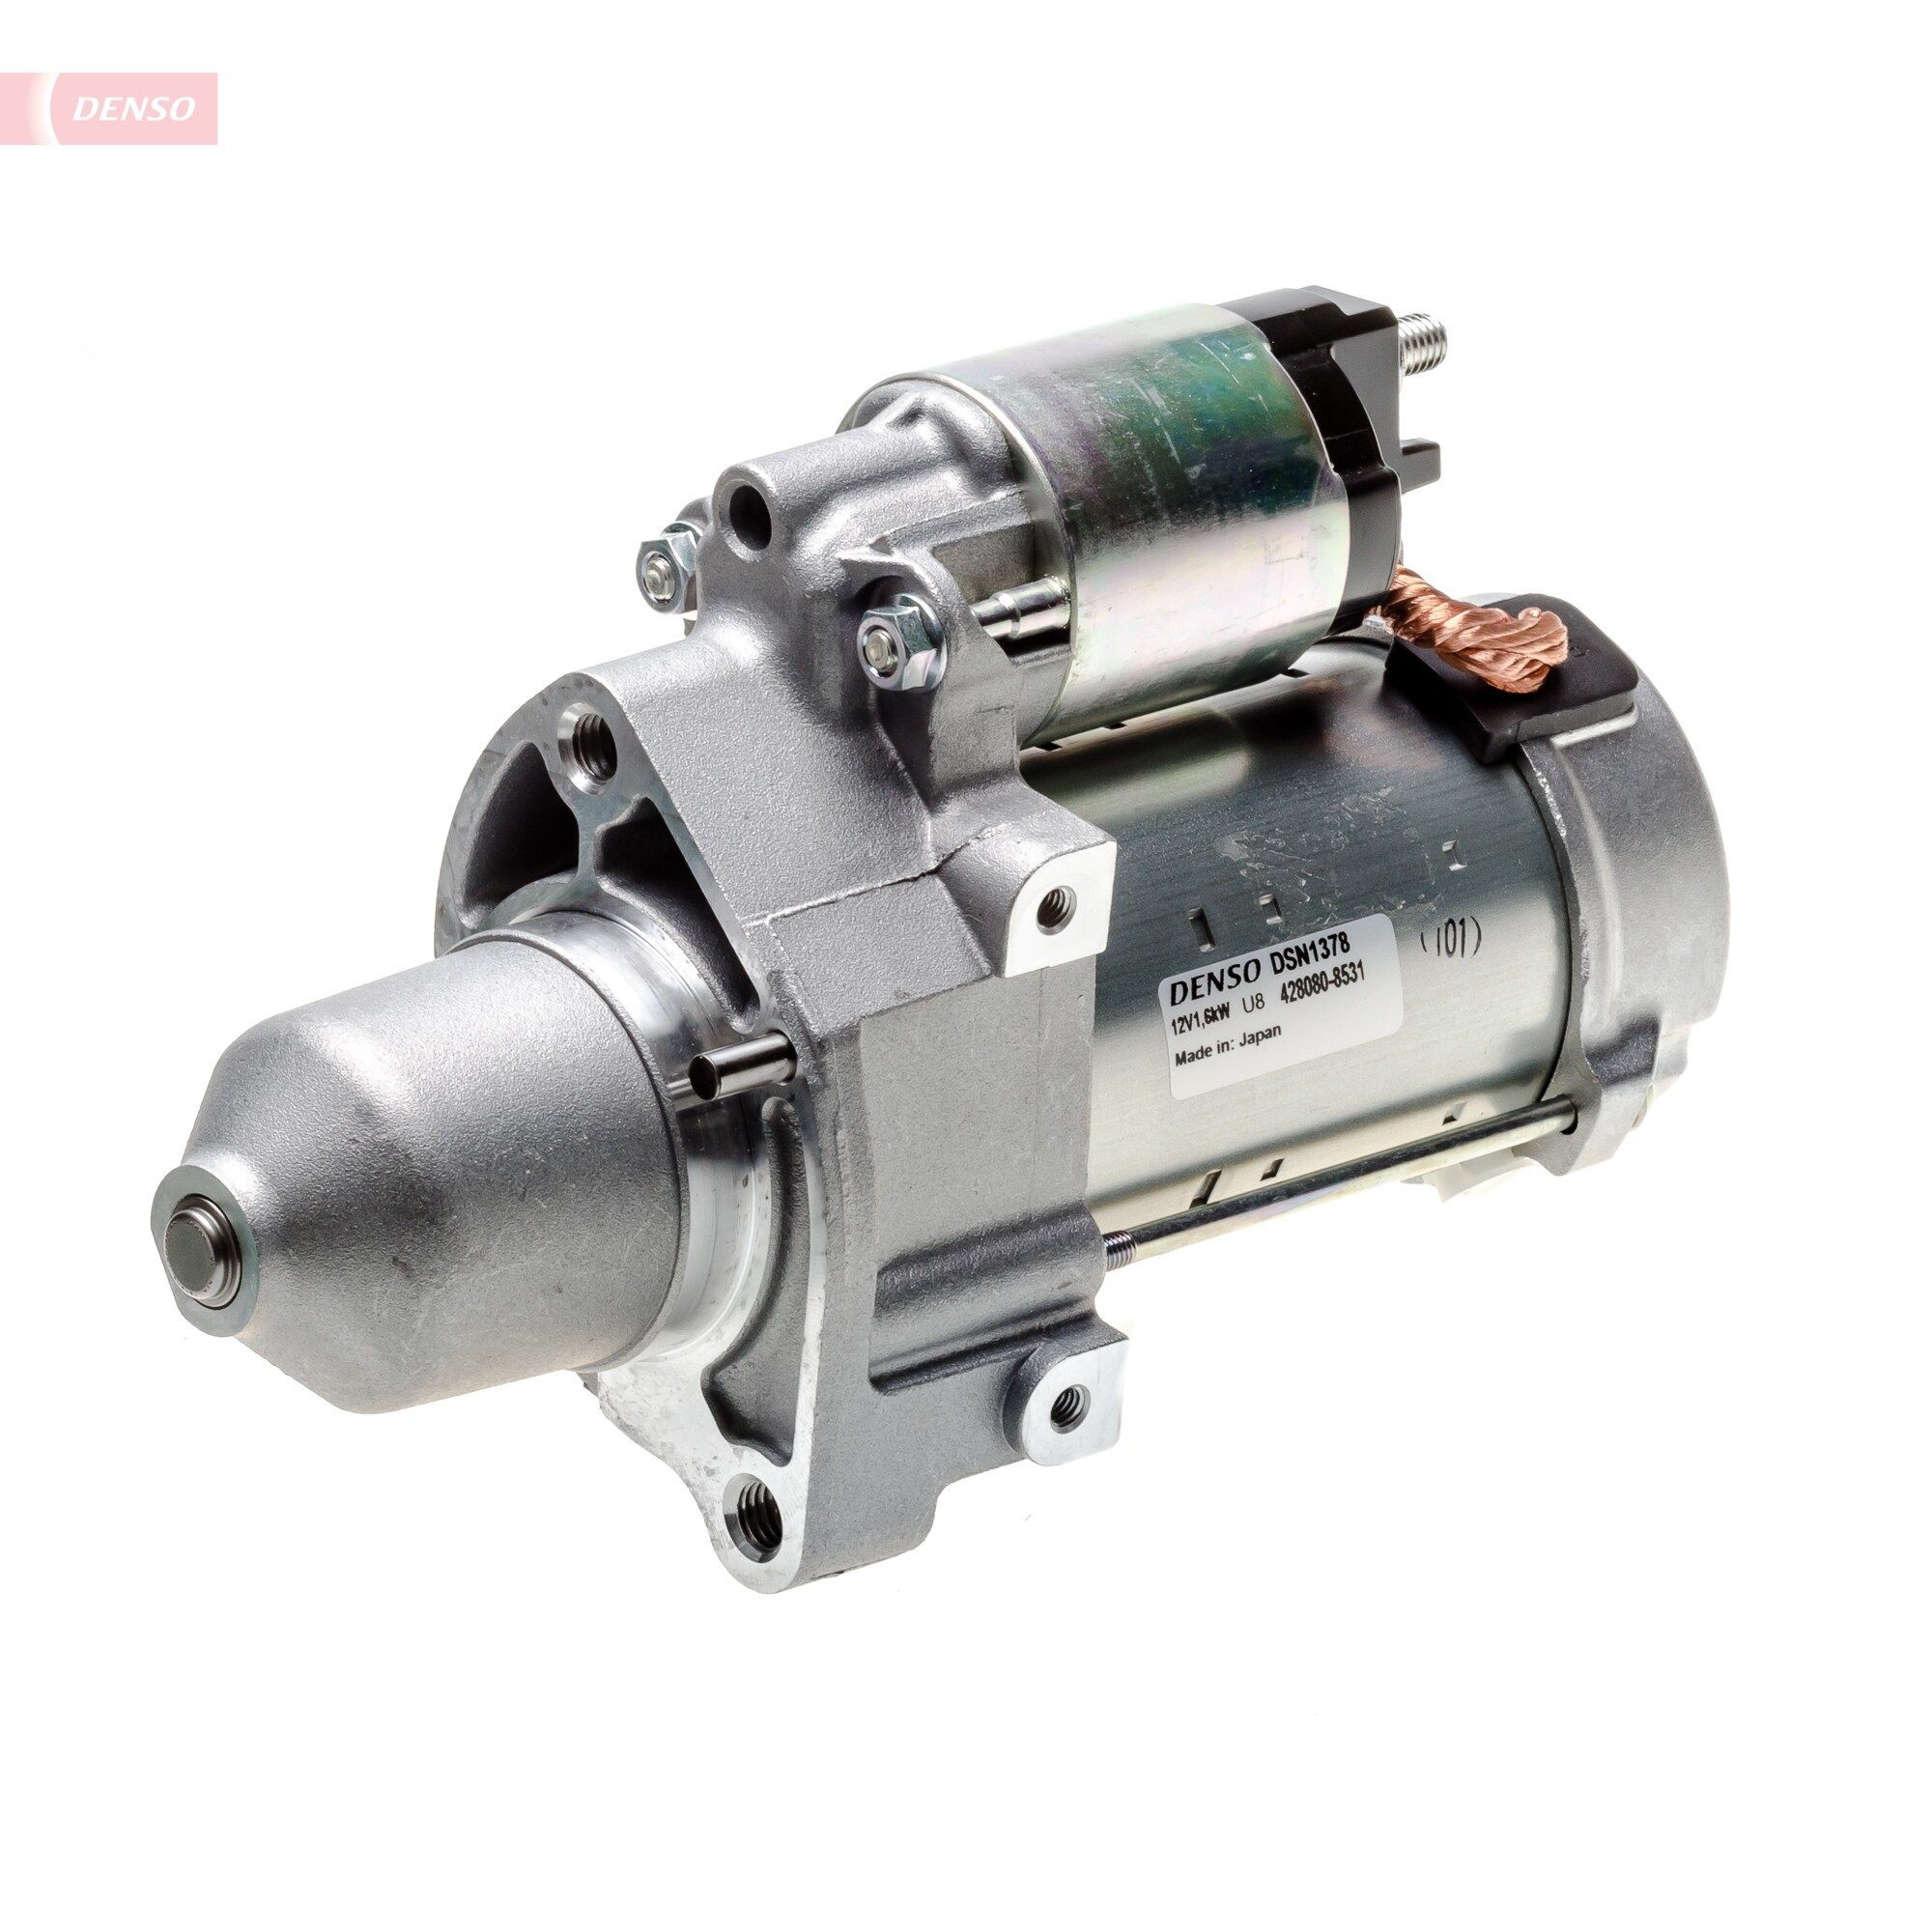 DENSO DSN1378 Starter motor BMW experience and price